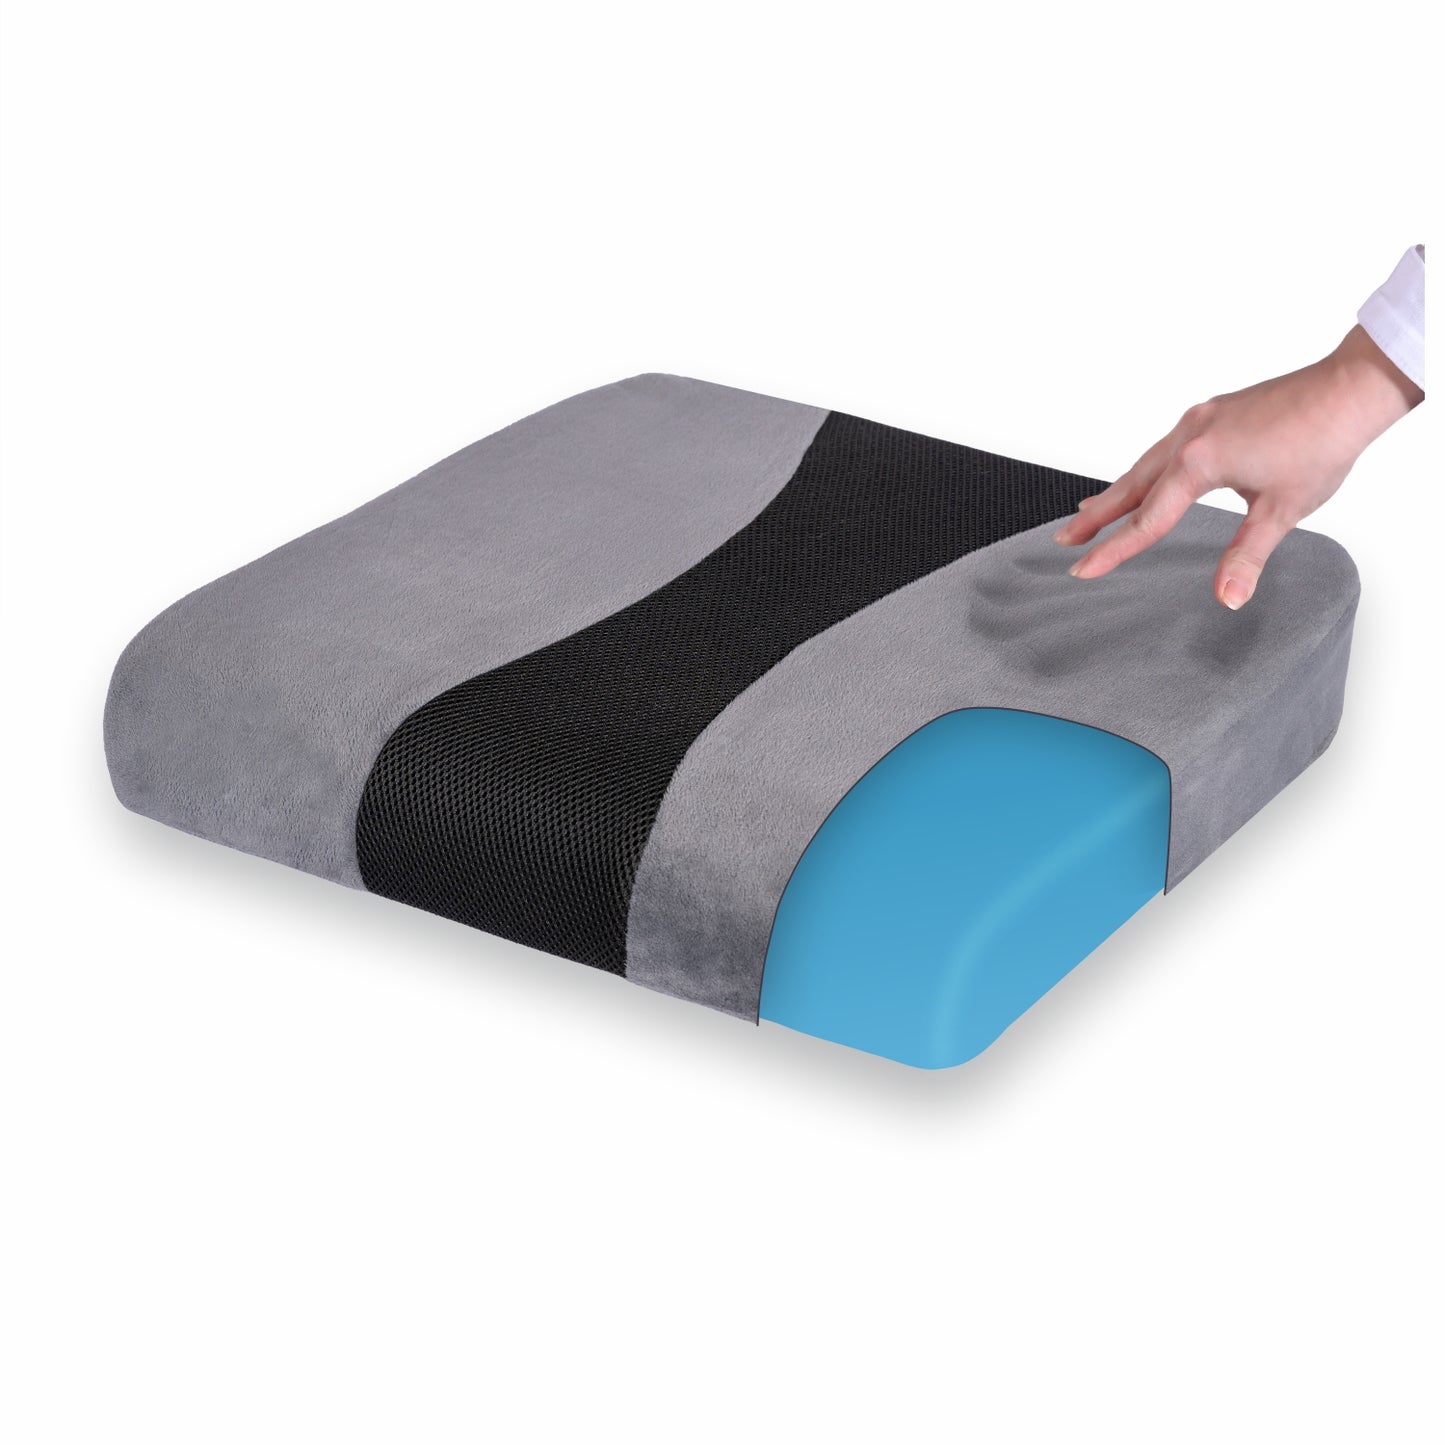 Extra Large Seat Cushion - Memory Foam for Office Chair